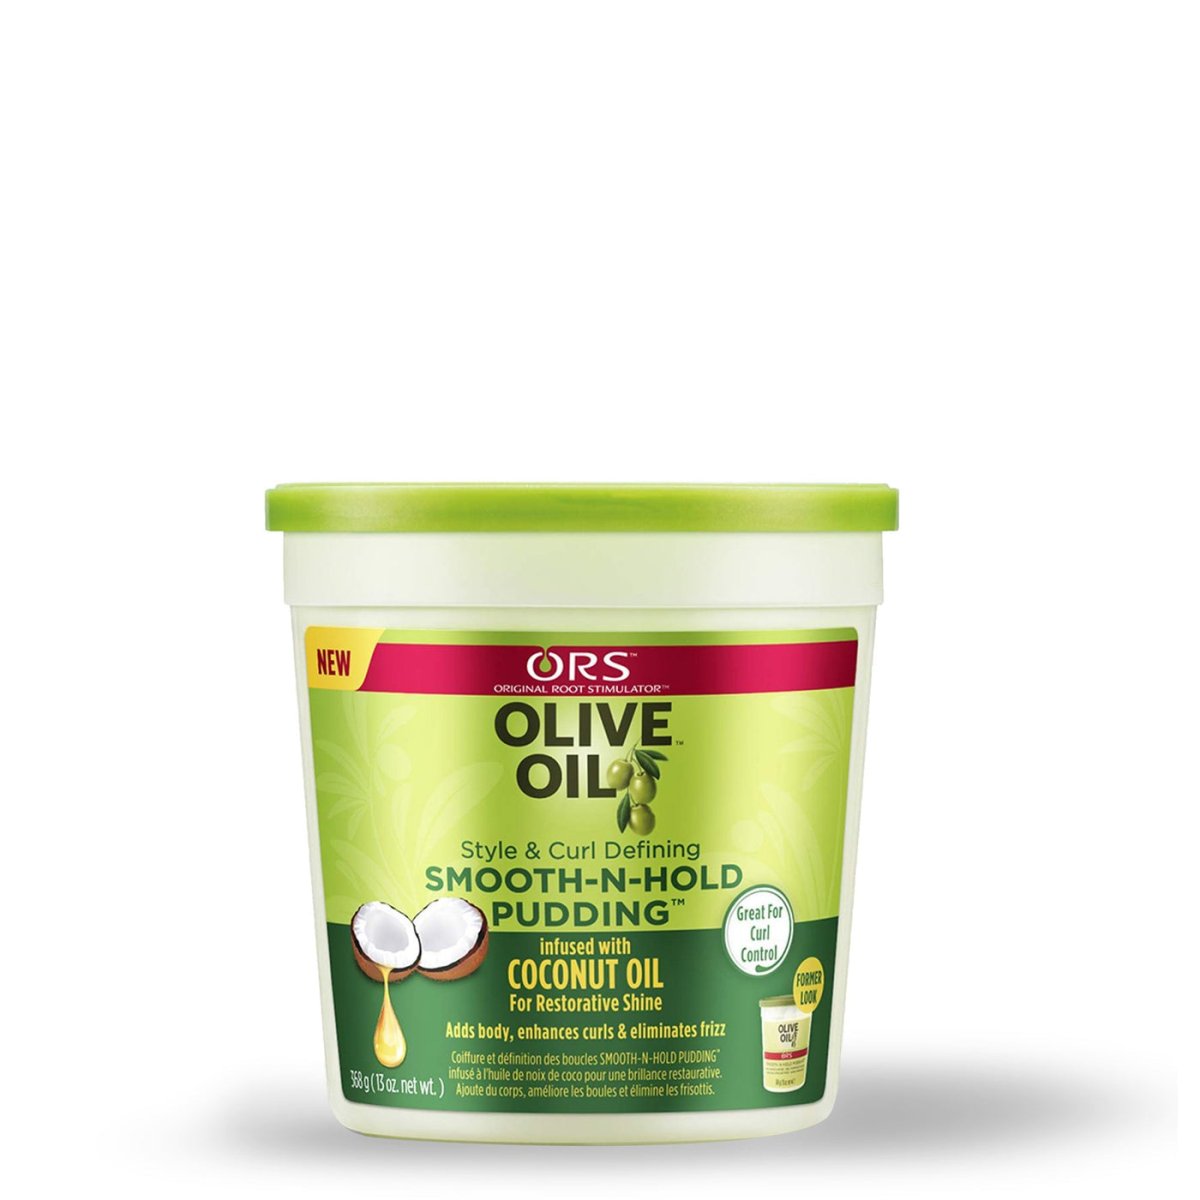 ORS Olive Oil Style & Curl Smooth N Hold Pudding 13oz - Southwestsix Cosmetics ORS Olive Oil Style & Curl Smooth N Hold Pudding 13oz Hair Pudding ORS Southwestsix Cosmetics 632169111640 ORS Olive Oil Style & Curl Smooth N Hold Pudding 13oz